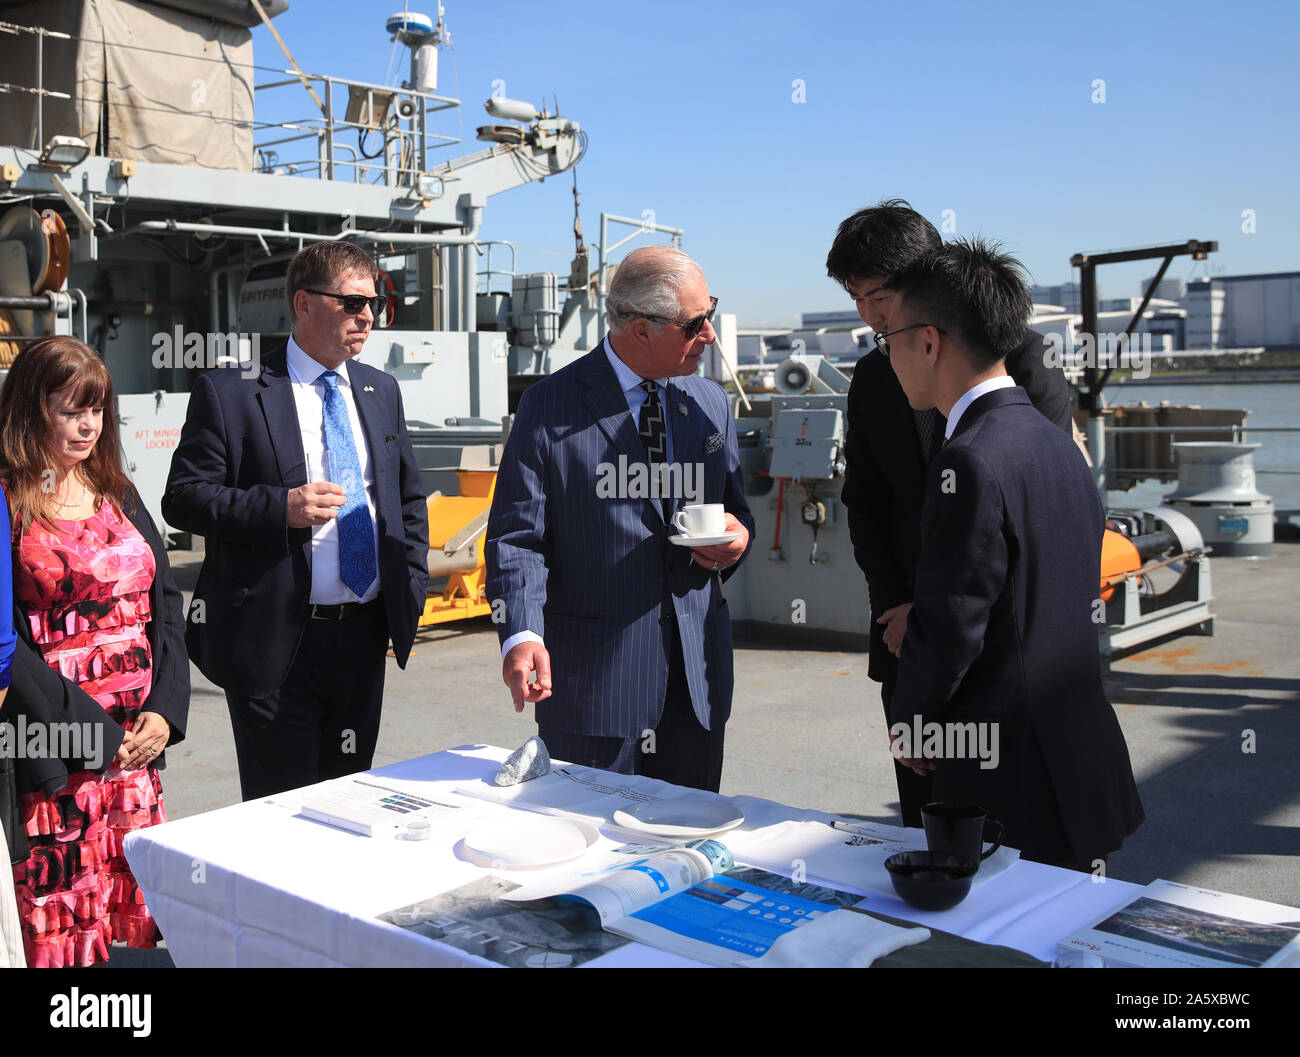 The Prince of Wales talks with representatives of groups tackling ocean plastics and climate change during a visit to HMS Enterprise, which is moored at Harumi Pier in Tokyo, Japan. Stock Photo